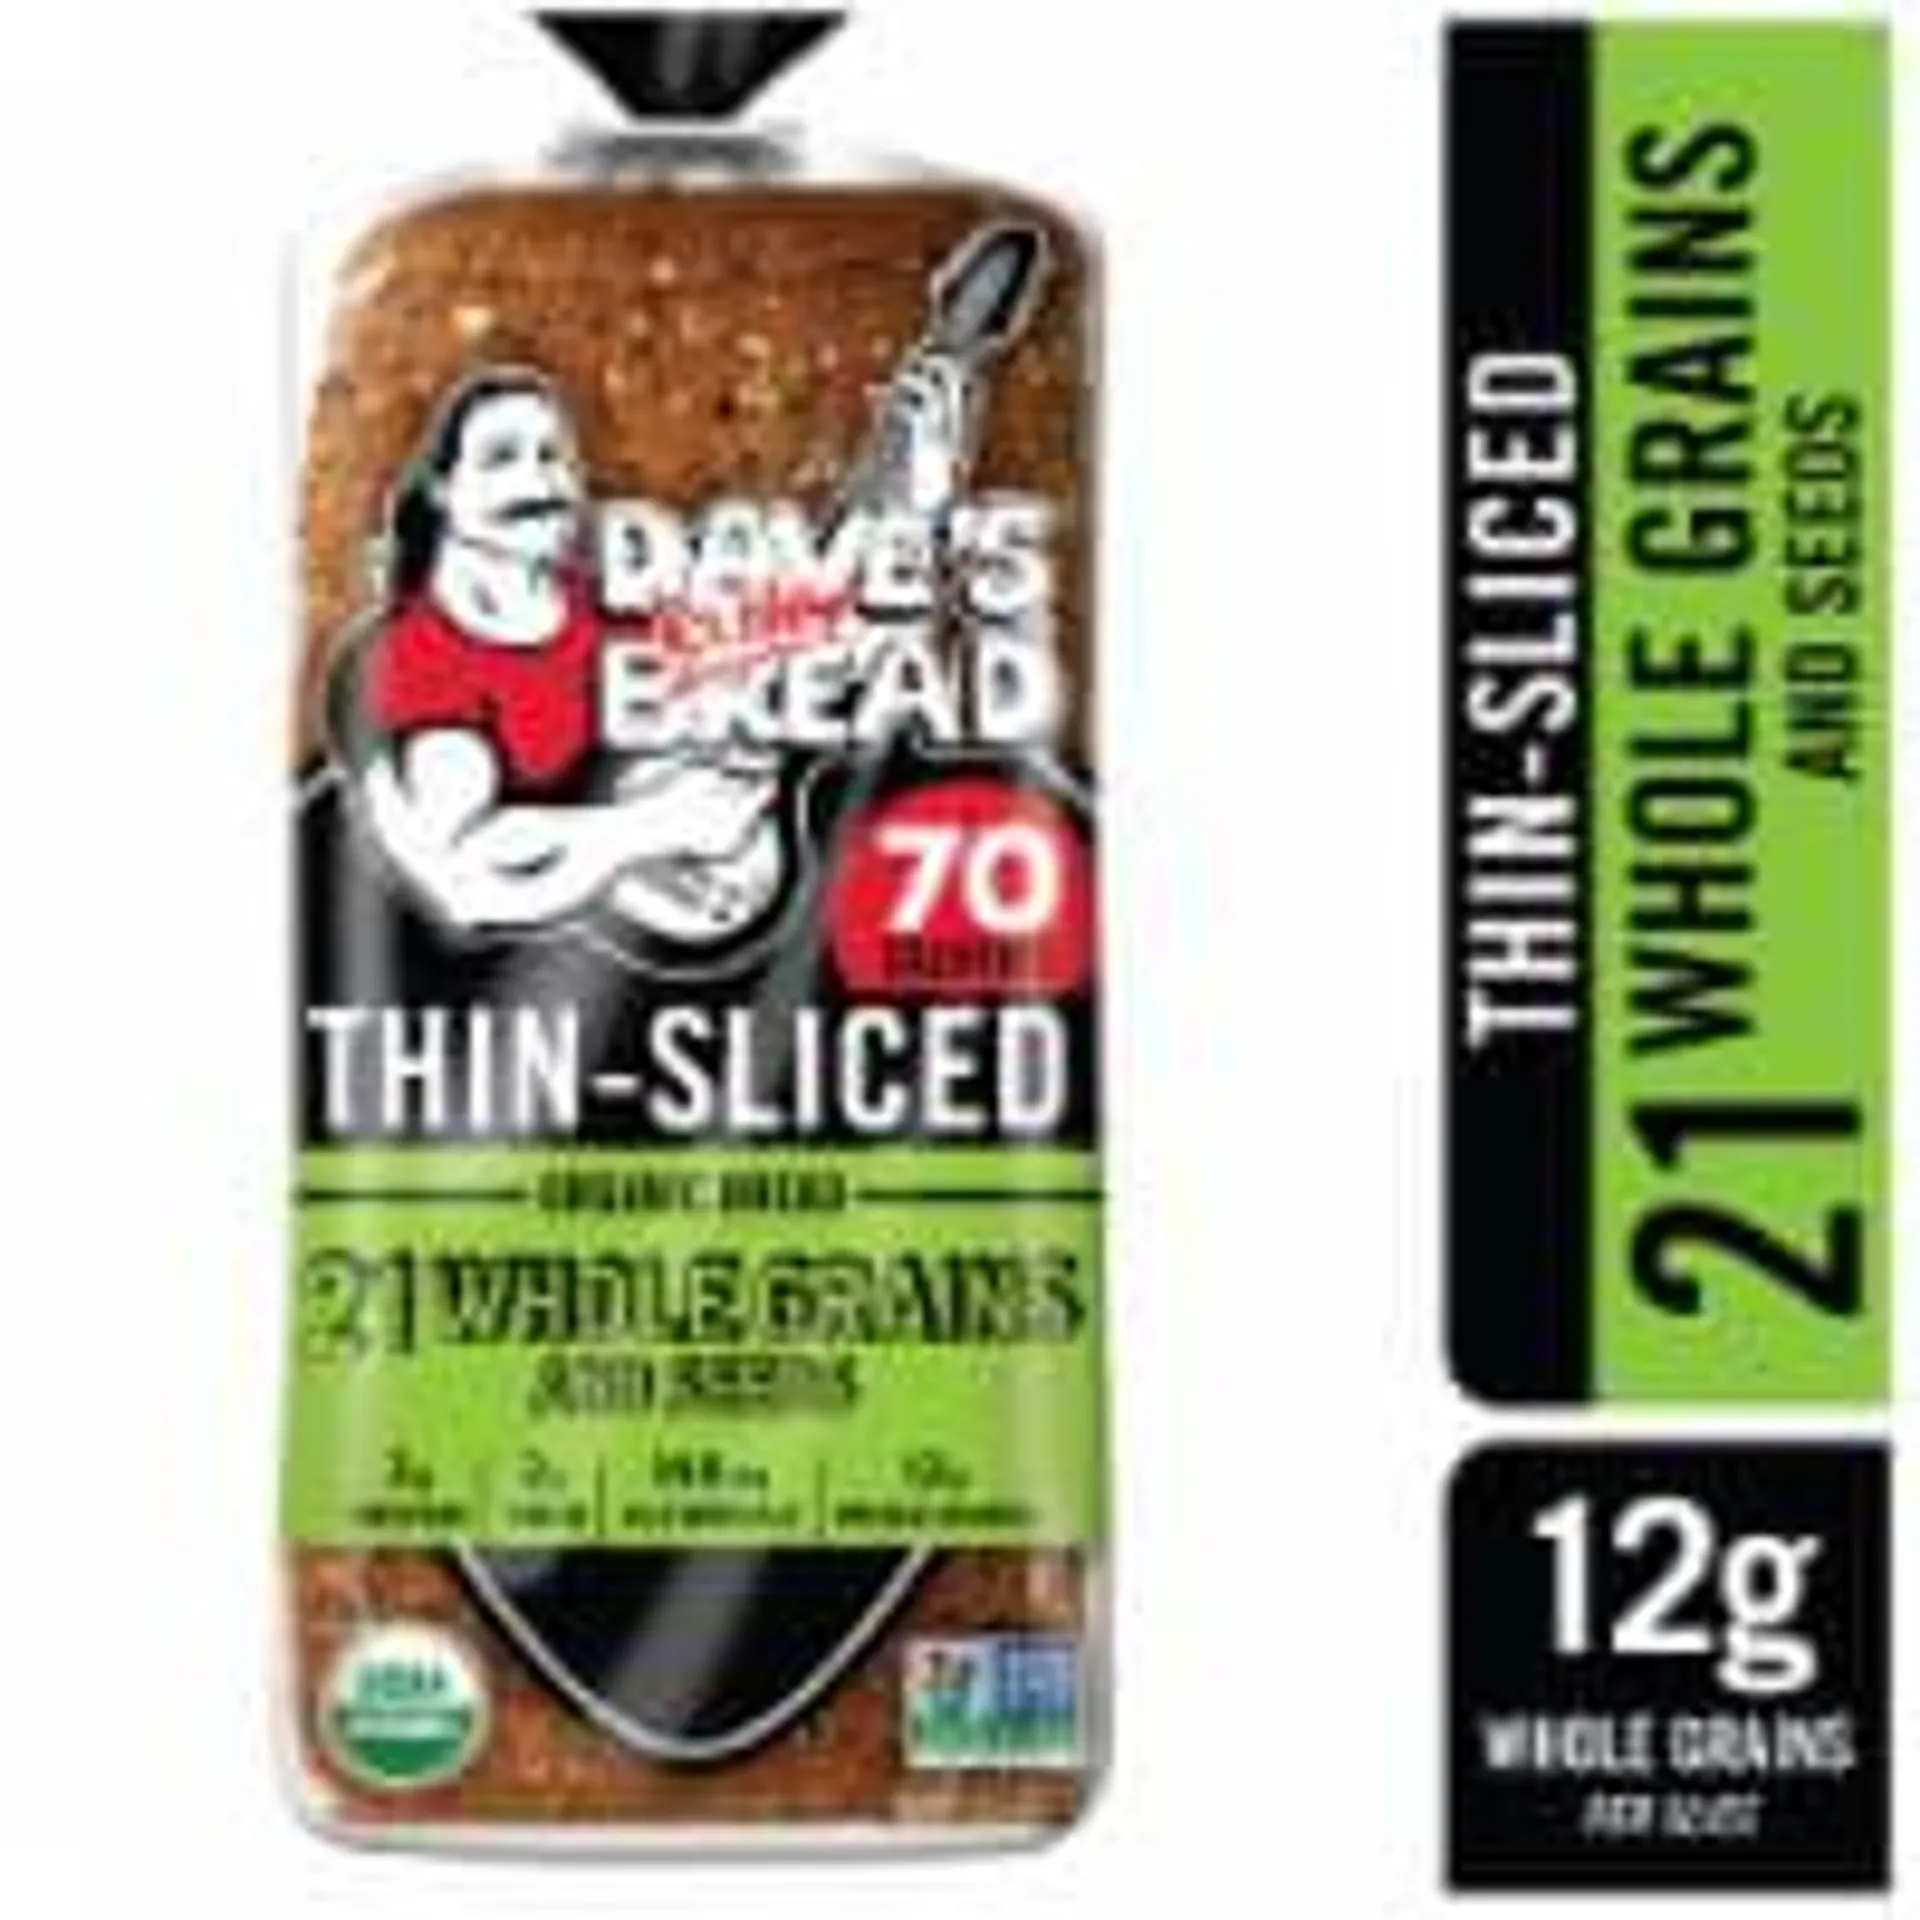 Dave's Killer Bread 21 Whole Grains and Seeds Thin-Sliced Organic Whole Grain Bread